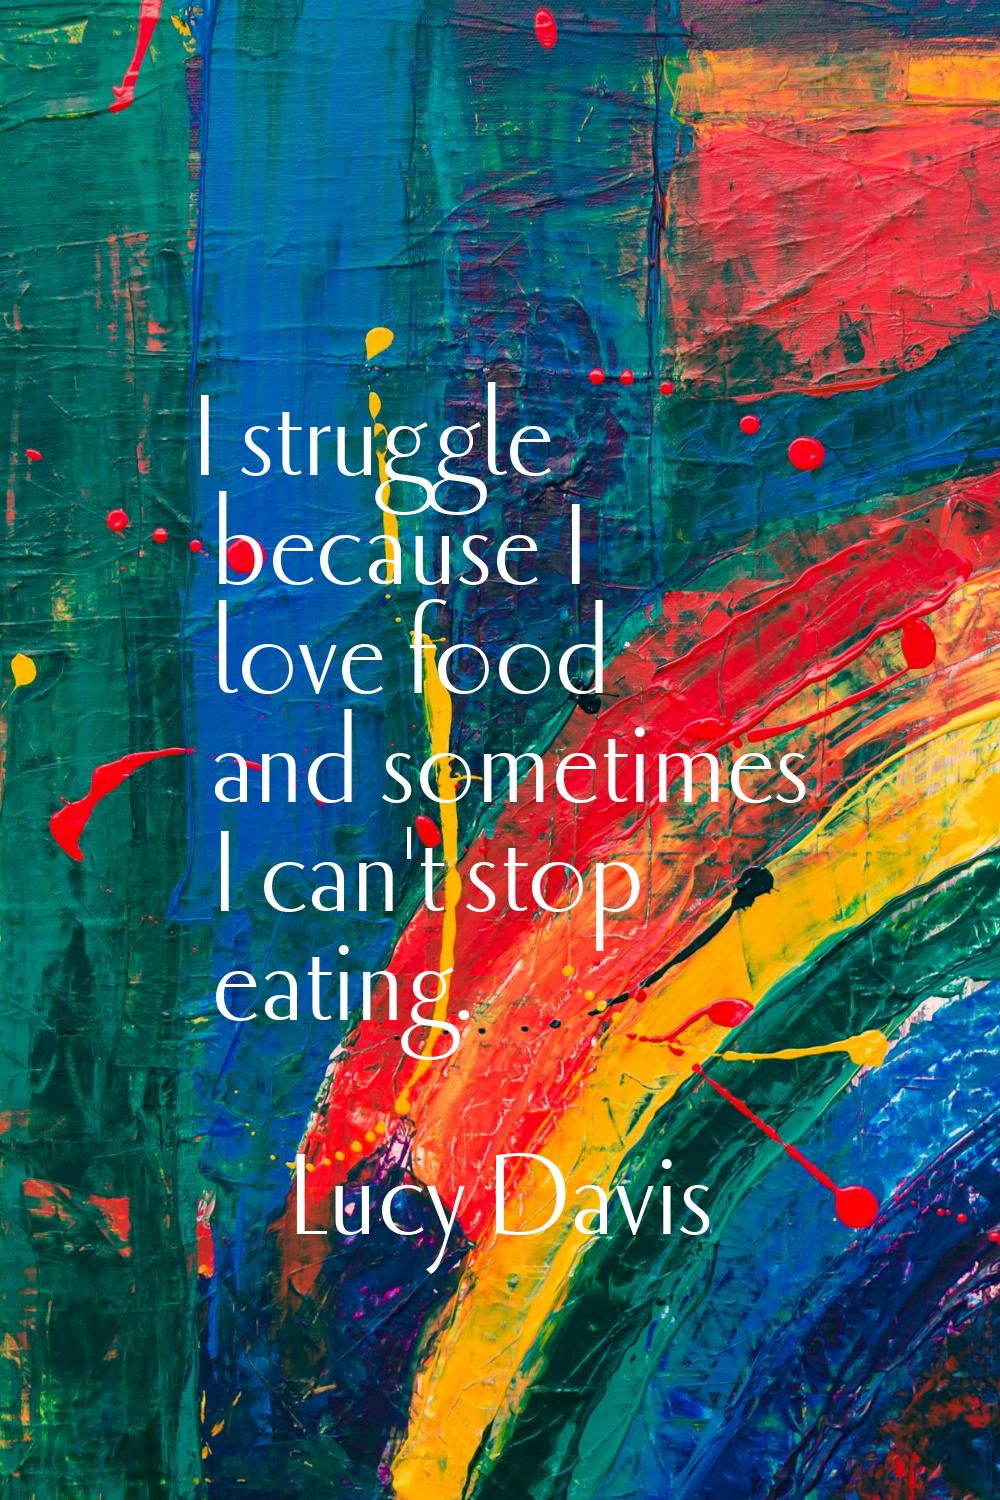 I struggle because I love food and sometimes I can't stop eating.